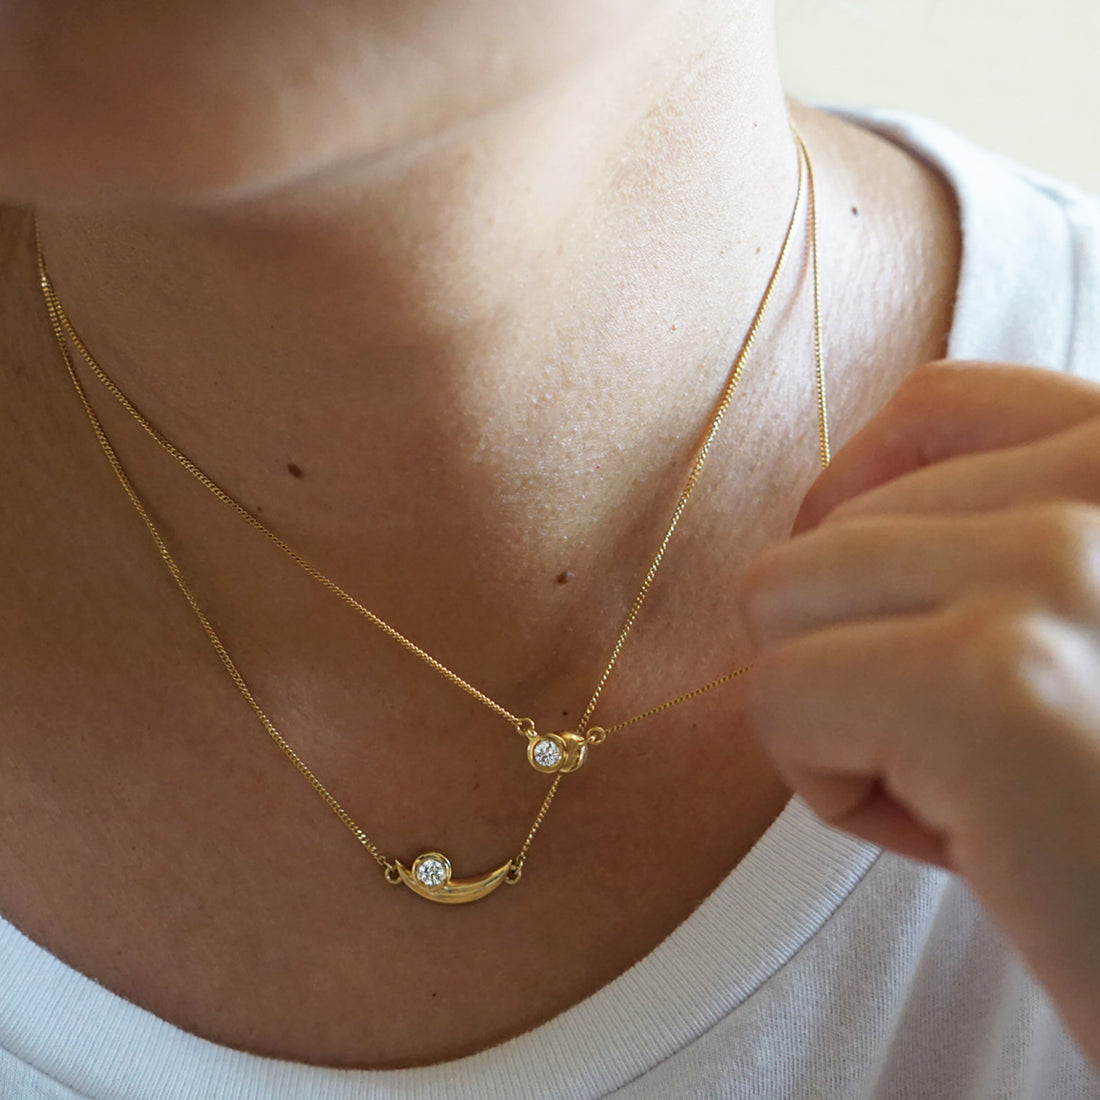 How to wear your sustainable gold diamond necklaces - Aiana